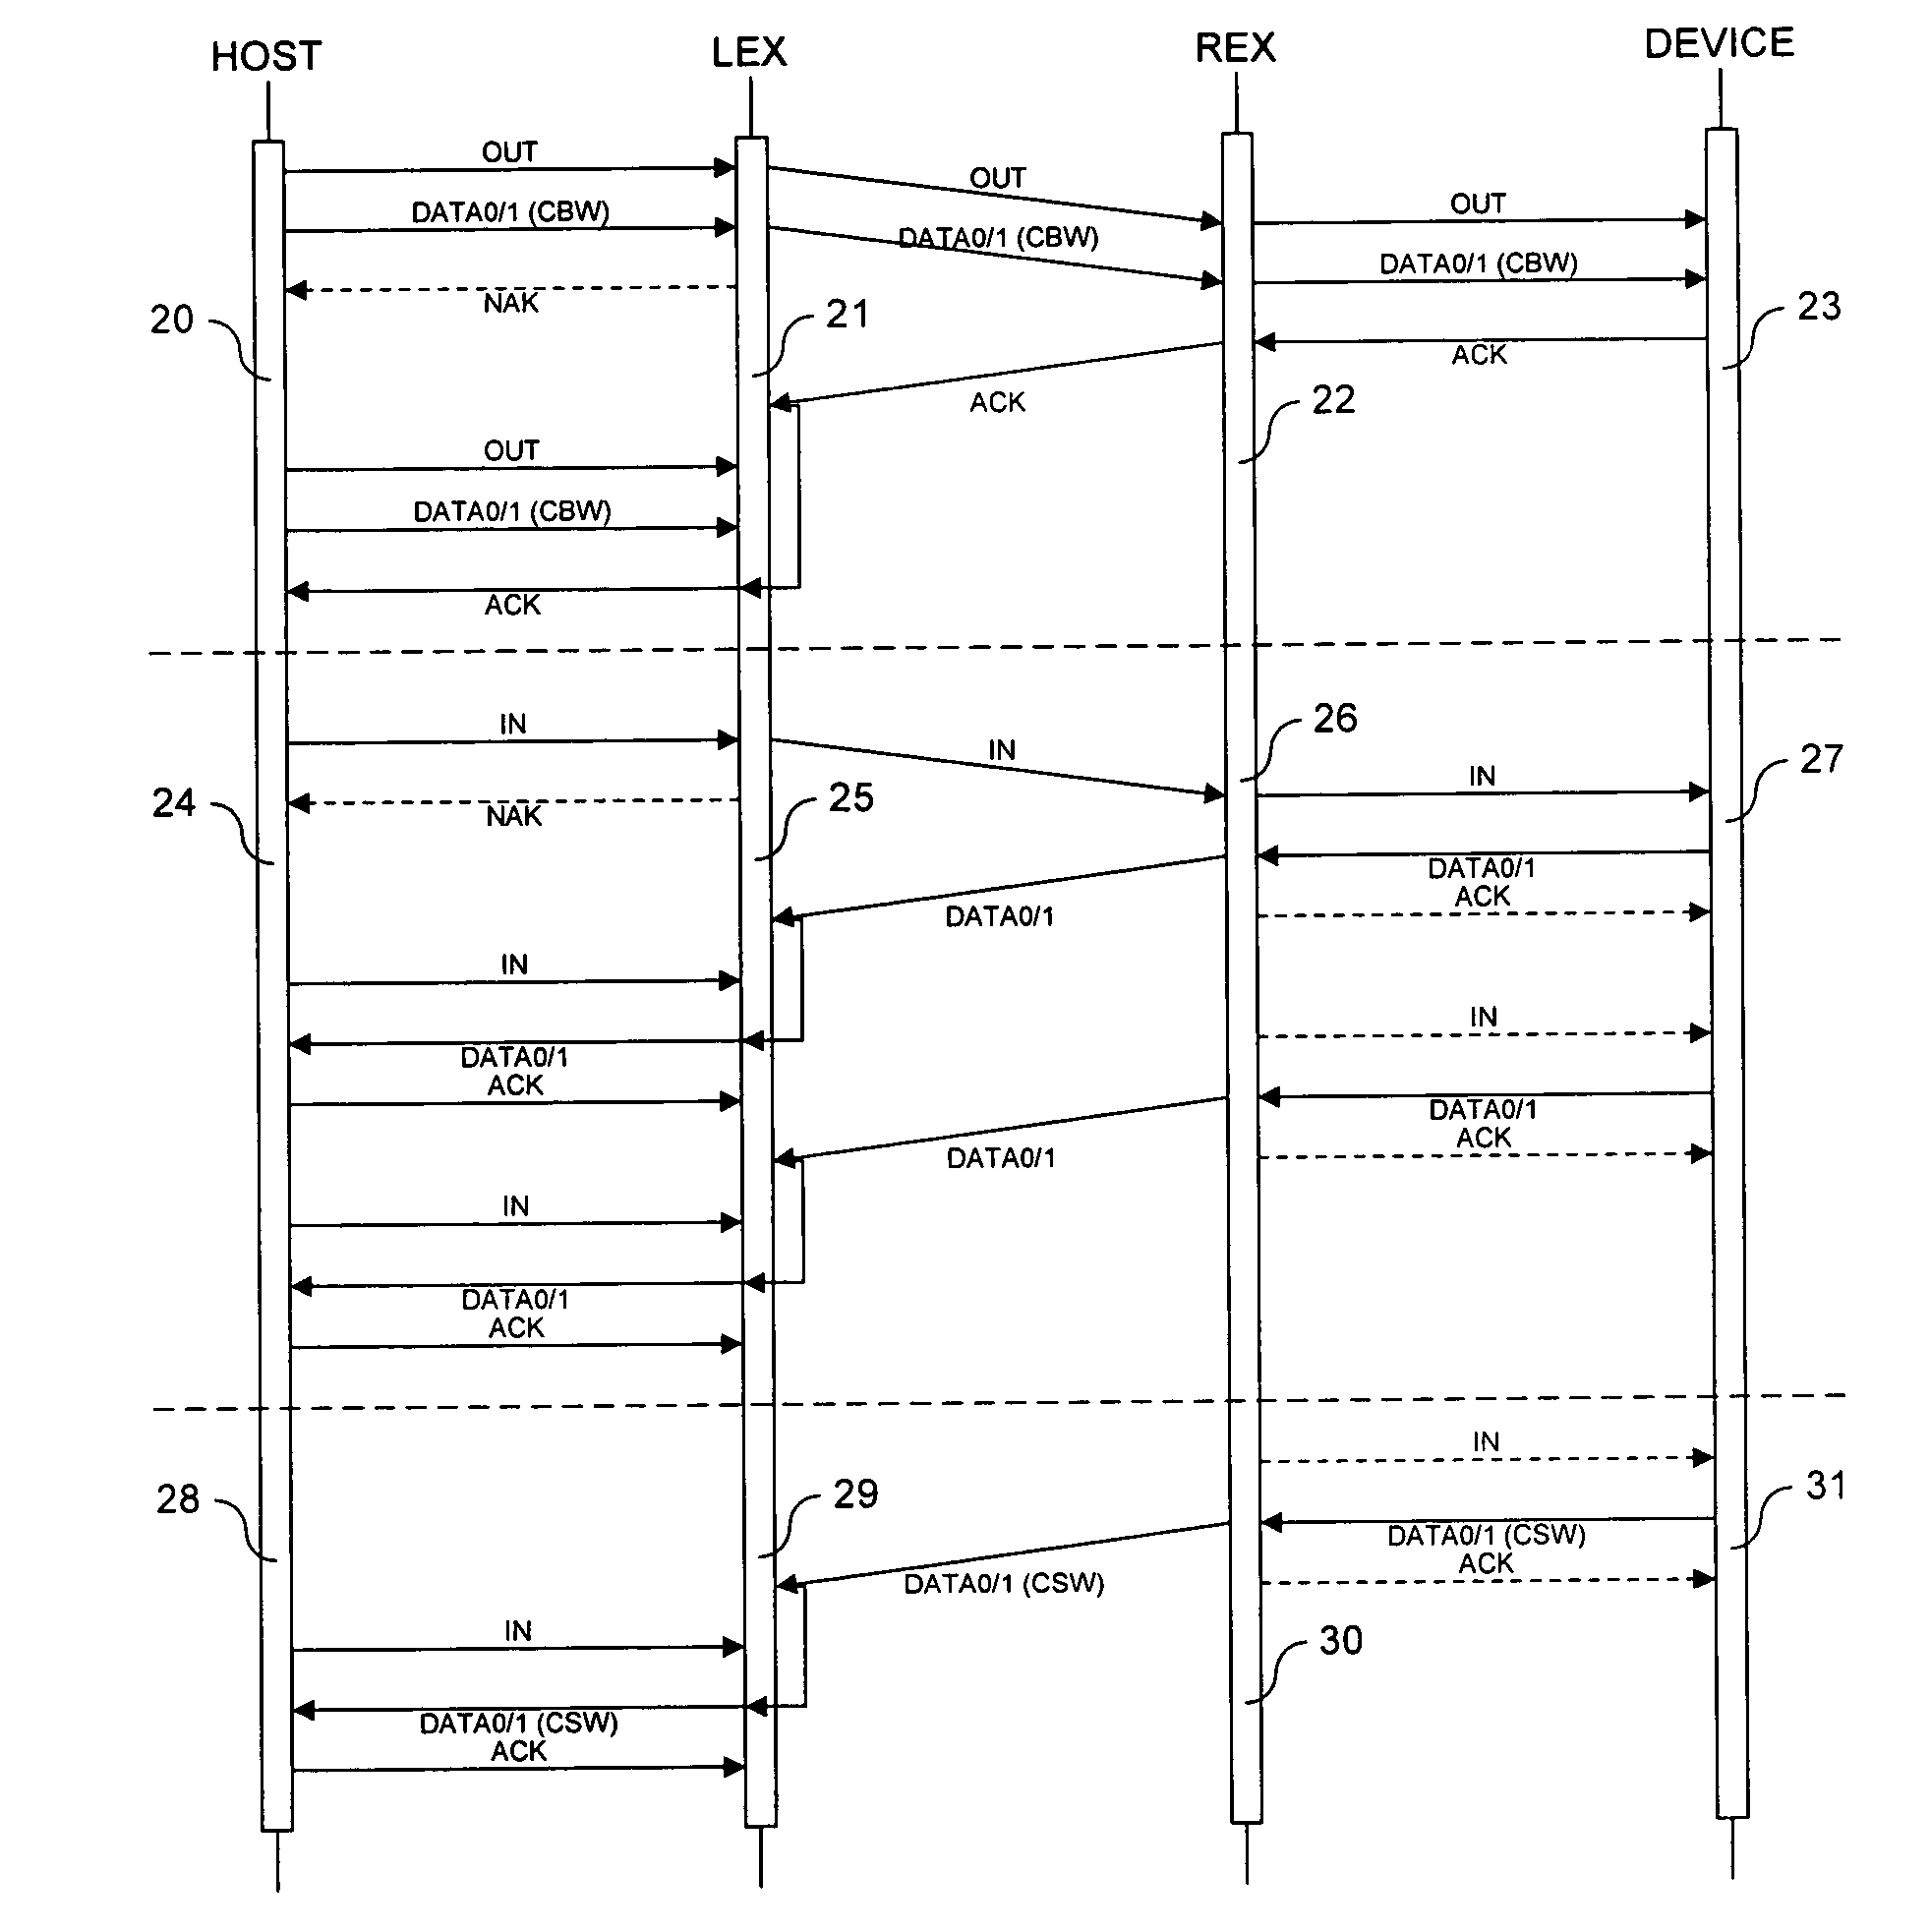 Method and apparatus for improving the performance of USB mass storage devices in the presence of long transmission delays